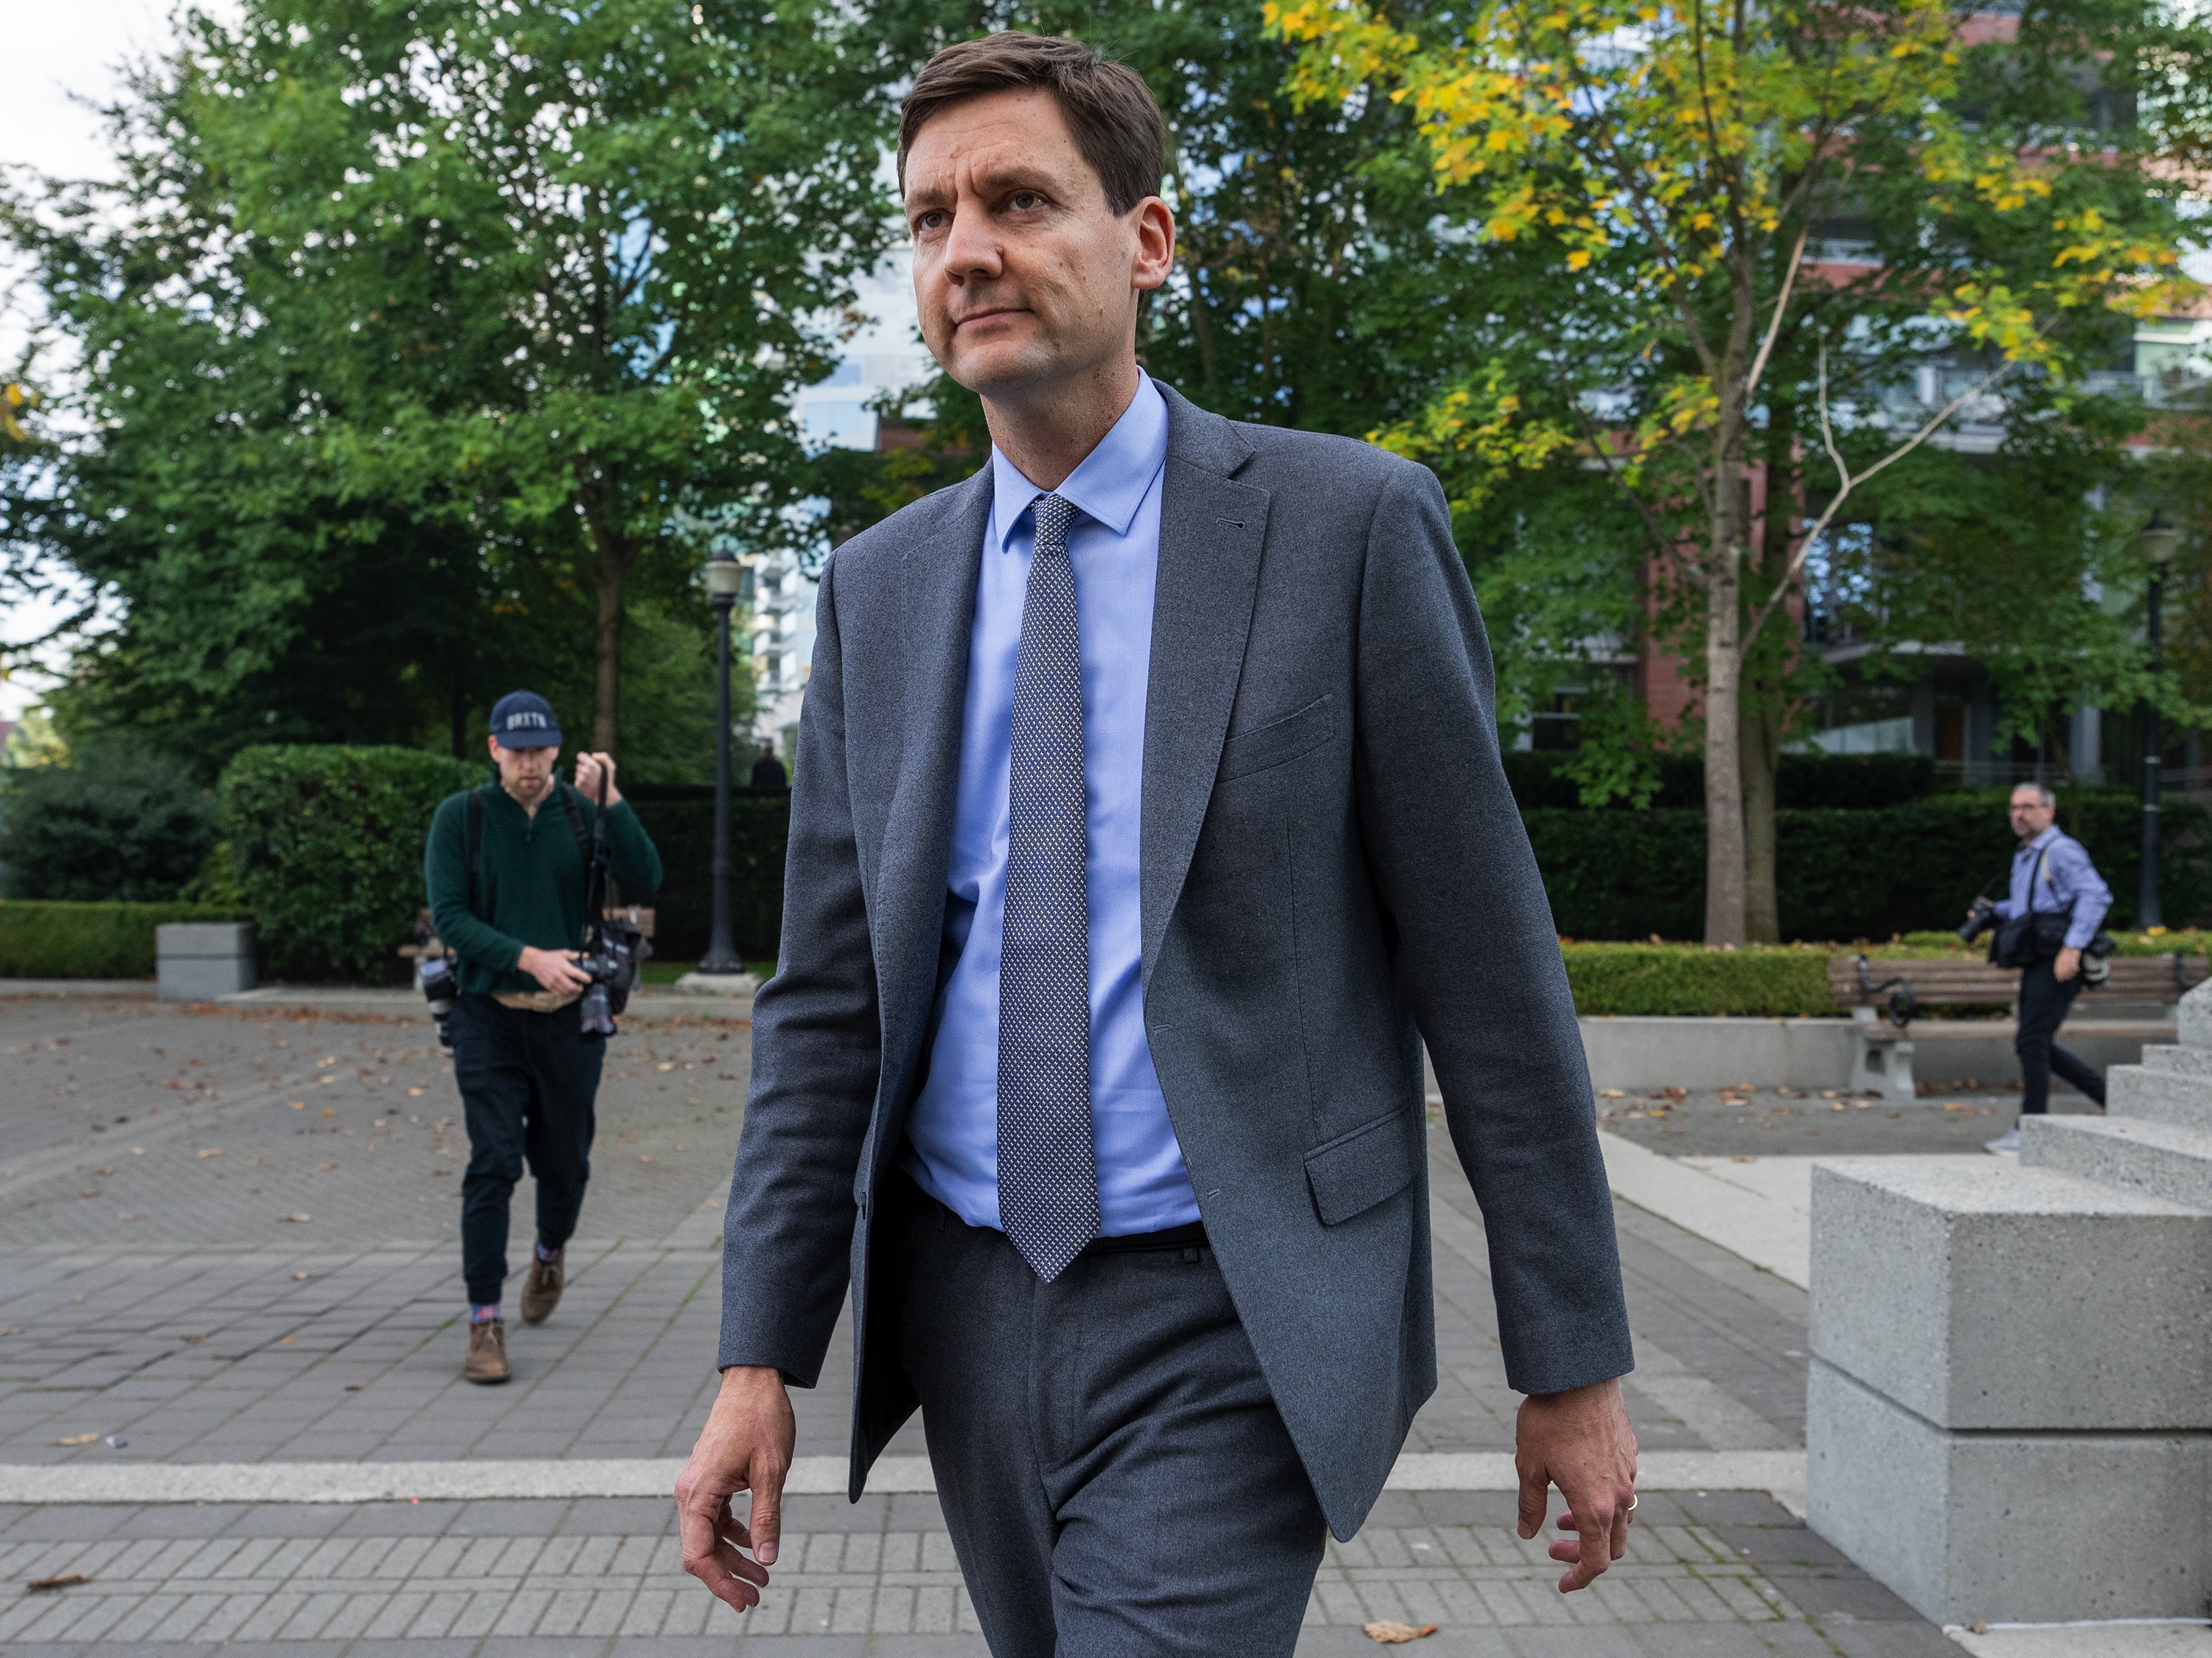 David Eby on his plans for B.C., legal aid and access to justice